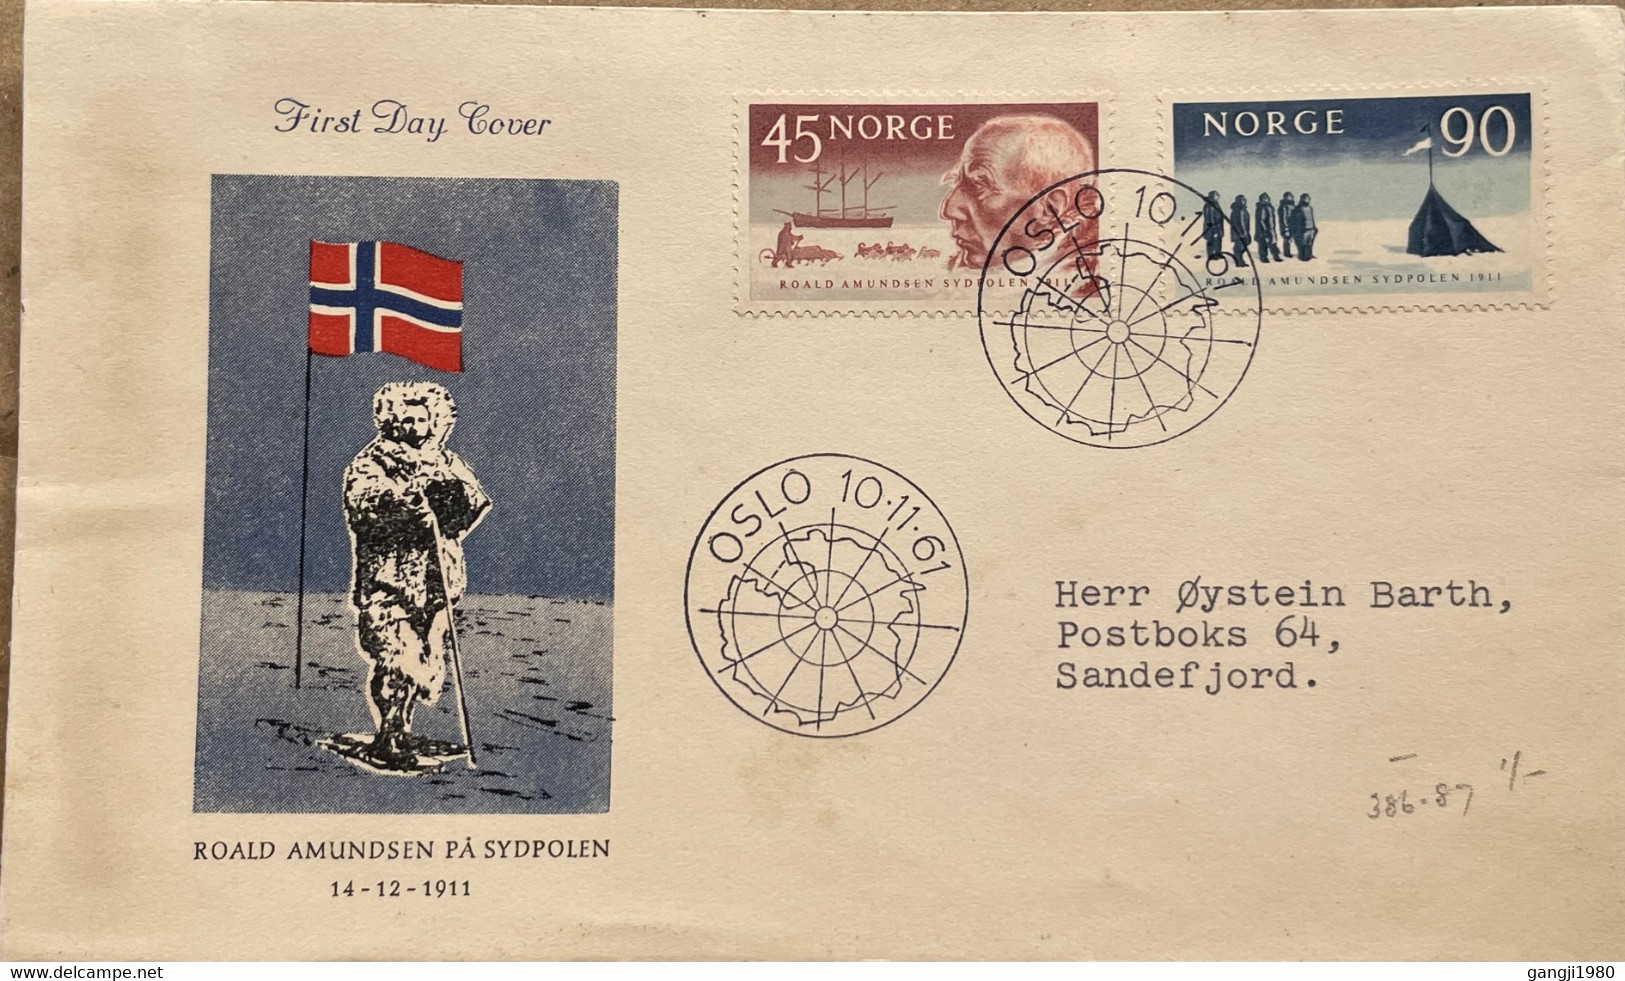 NORWAY 1961, FDC PRIVATE COVER, ILLUSTRATE FLAG, AMUNDSEN'S ARRIVAL AT SOUTH POLE, PARTY & TENT, 2 STAMP, OSLO CITY CANC - Brieven En Documenten